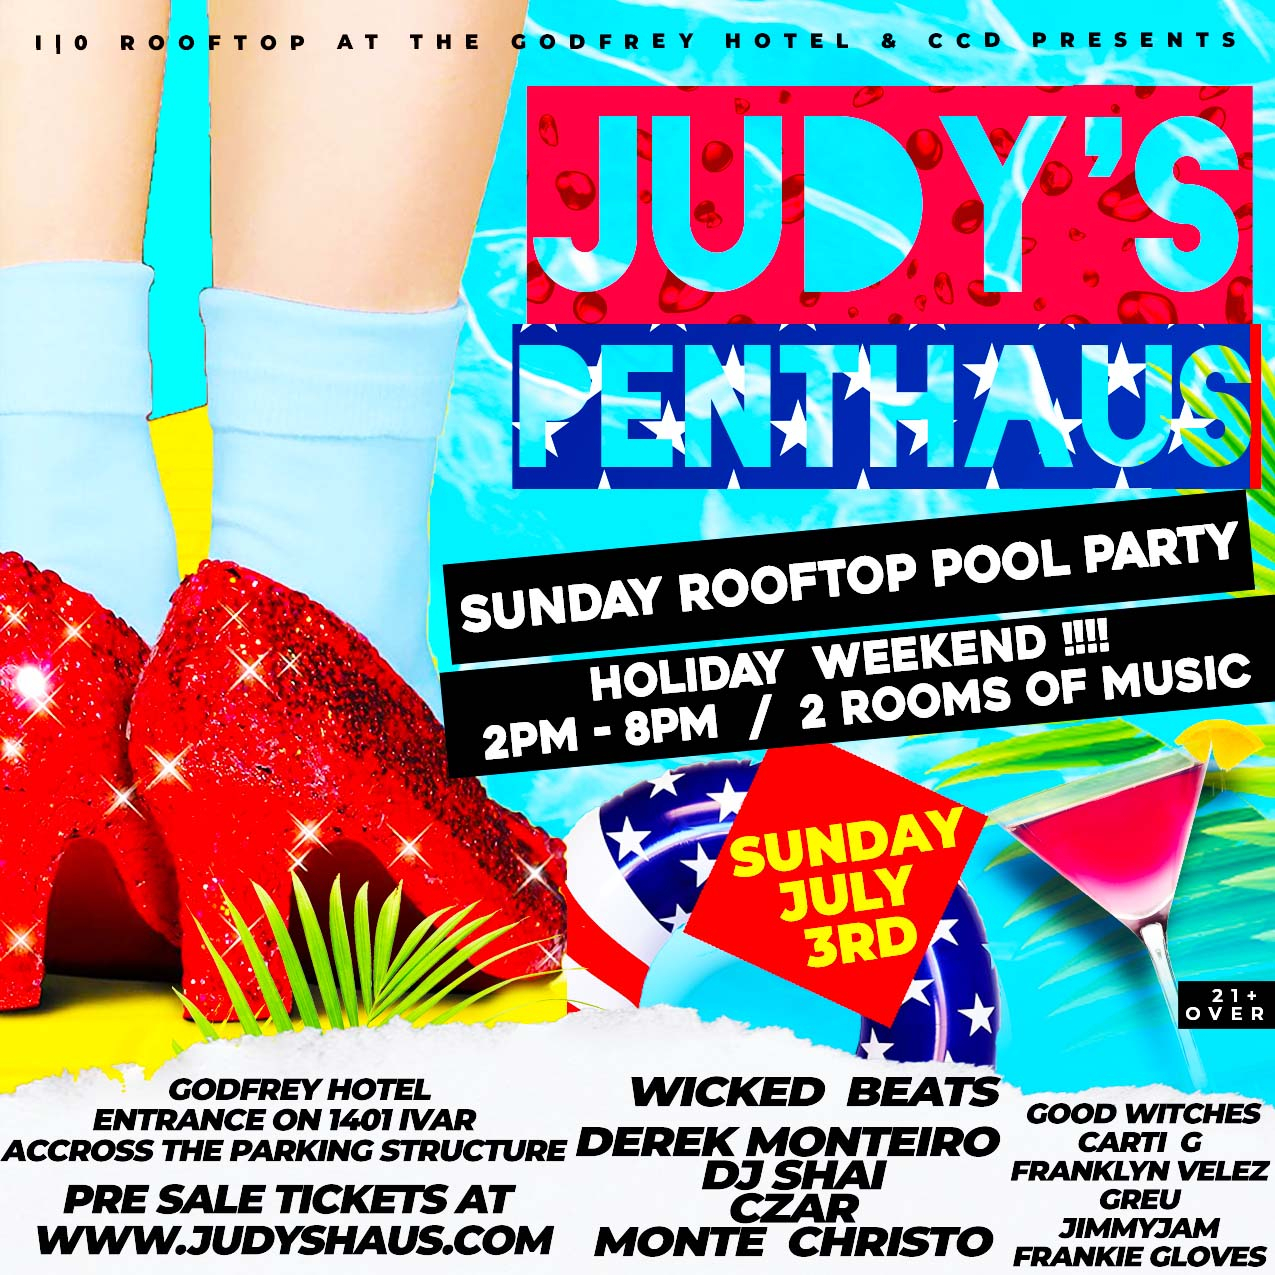 Judy's PentHaus ROOFTOP PooL Party - Flyer front